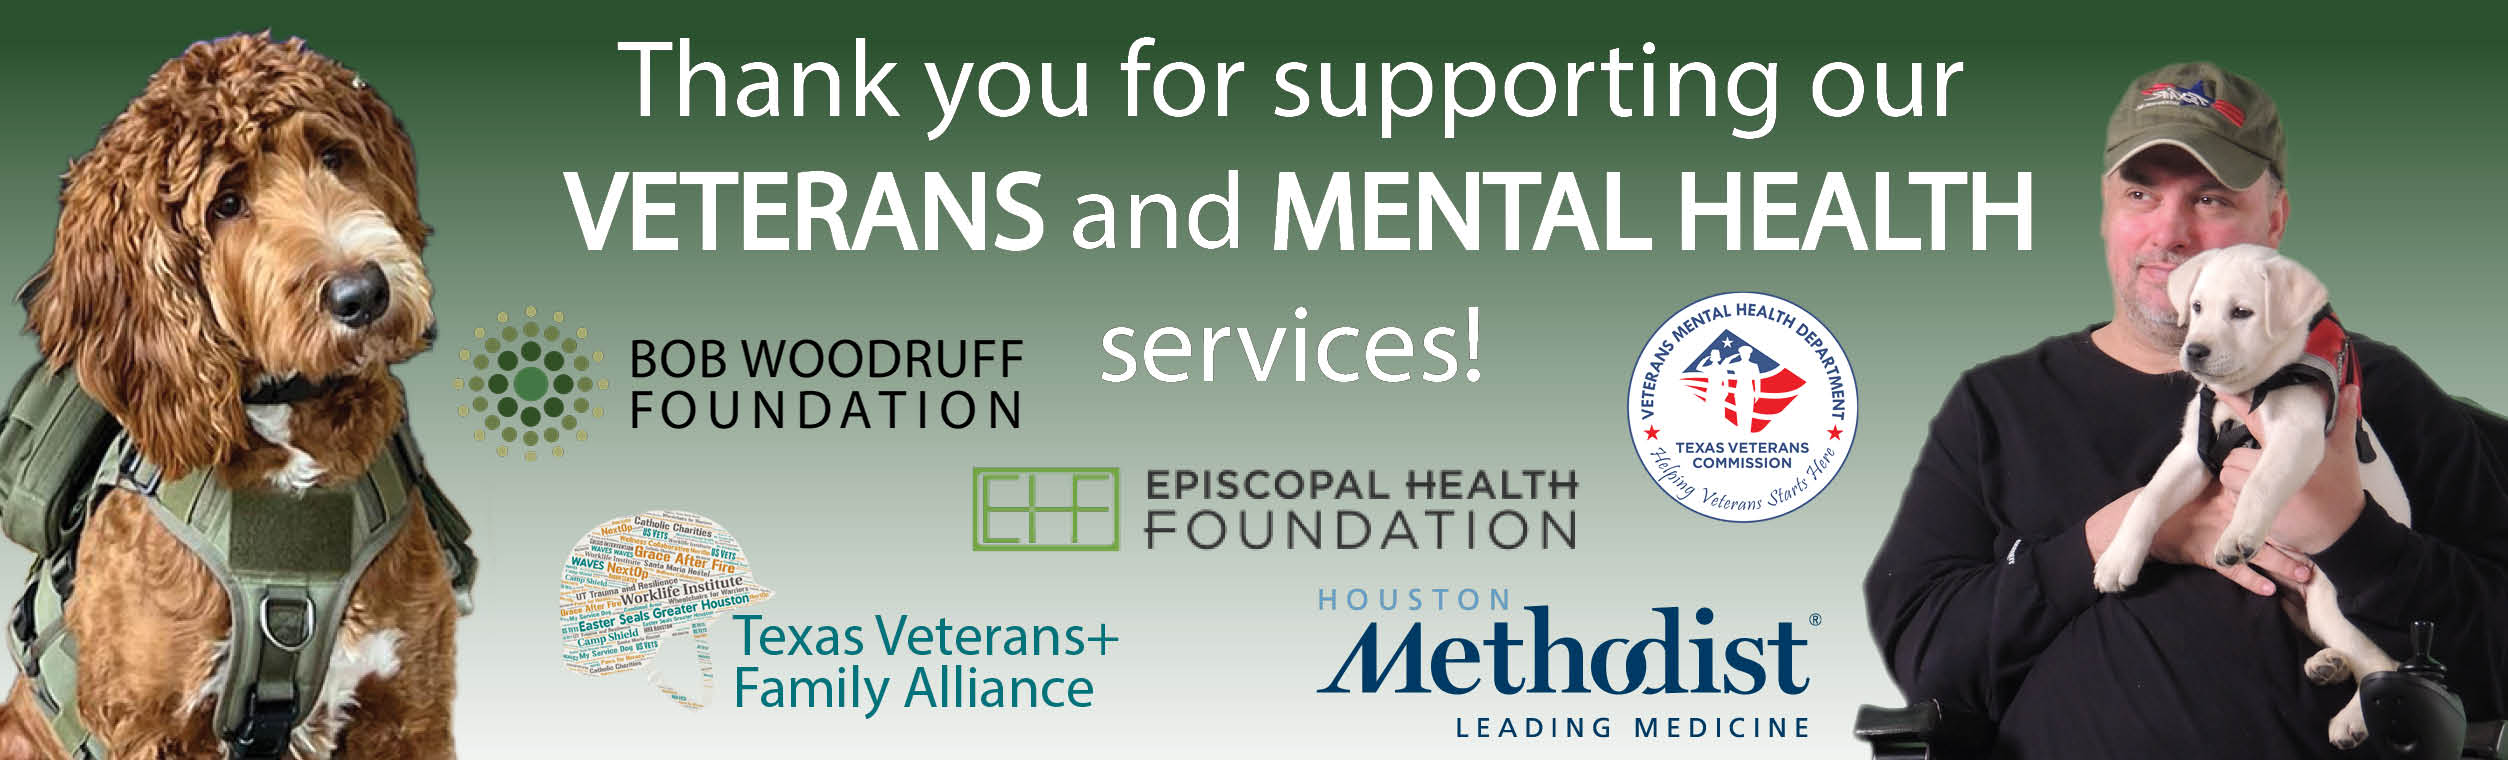 Service members, veterans and their families get life-changing services thanks to our incredible supporters.